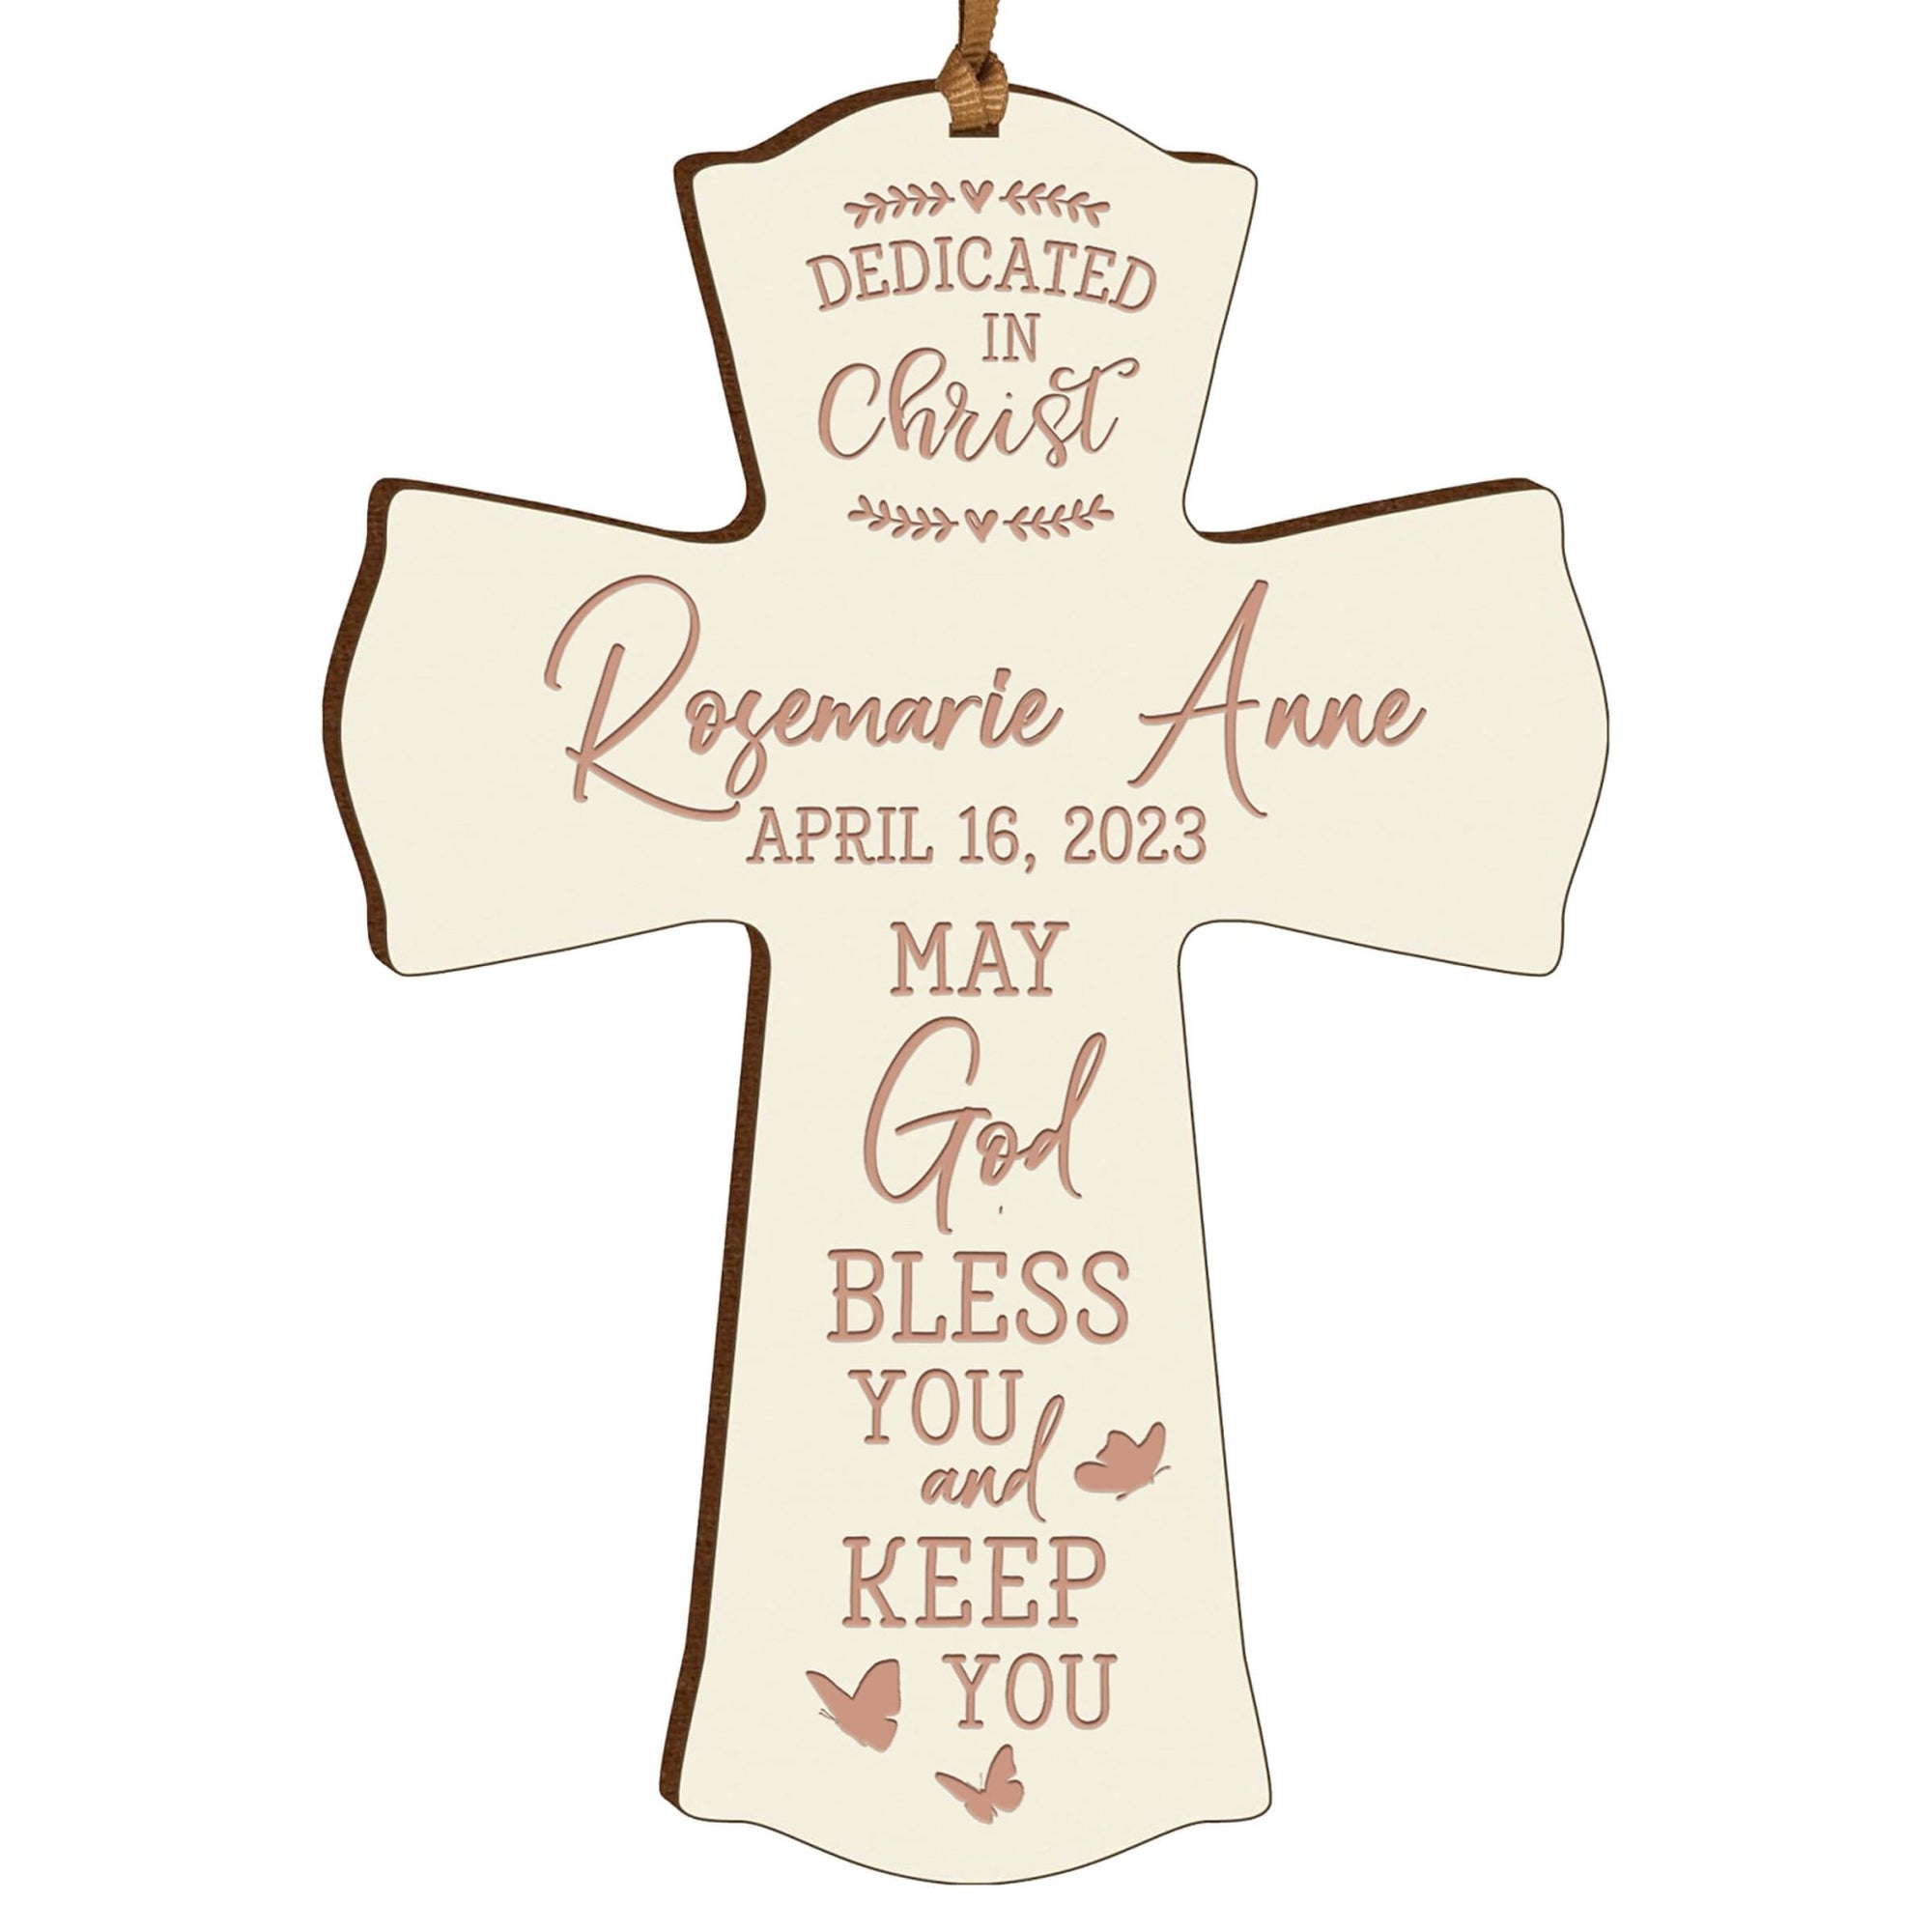 Personalized Engraved Wooden Dedication Crosses - Dedicated In Christ - LifeSong Milestones